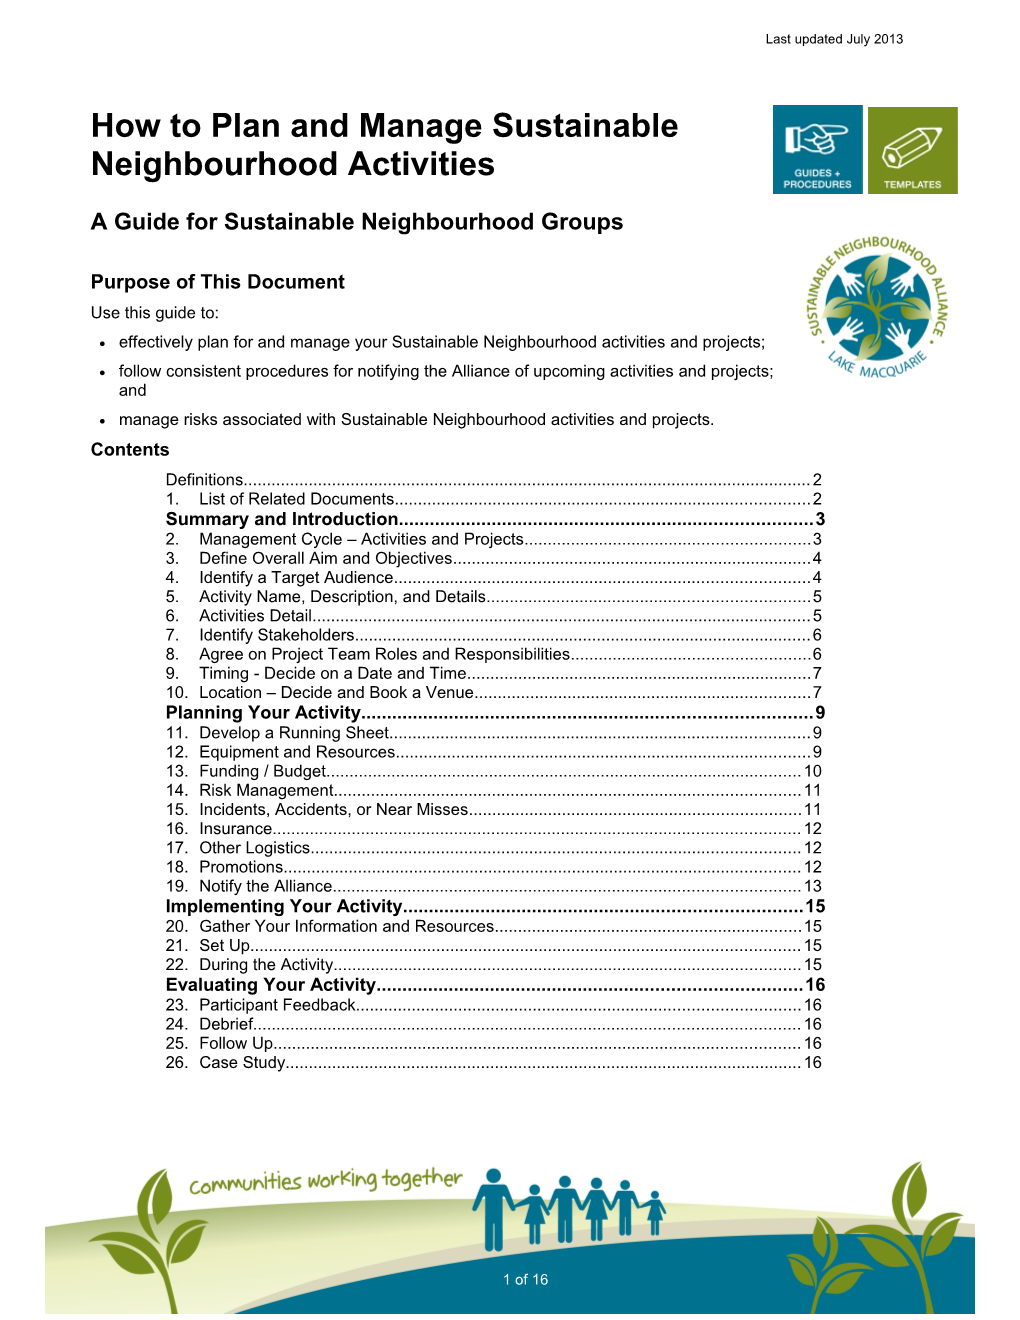 How to Plan and Manage Sustainable Neighbourhood Activities